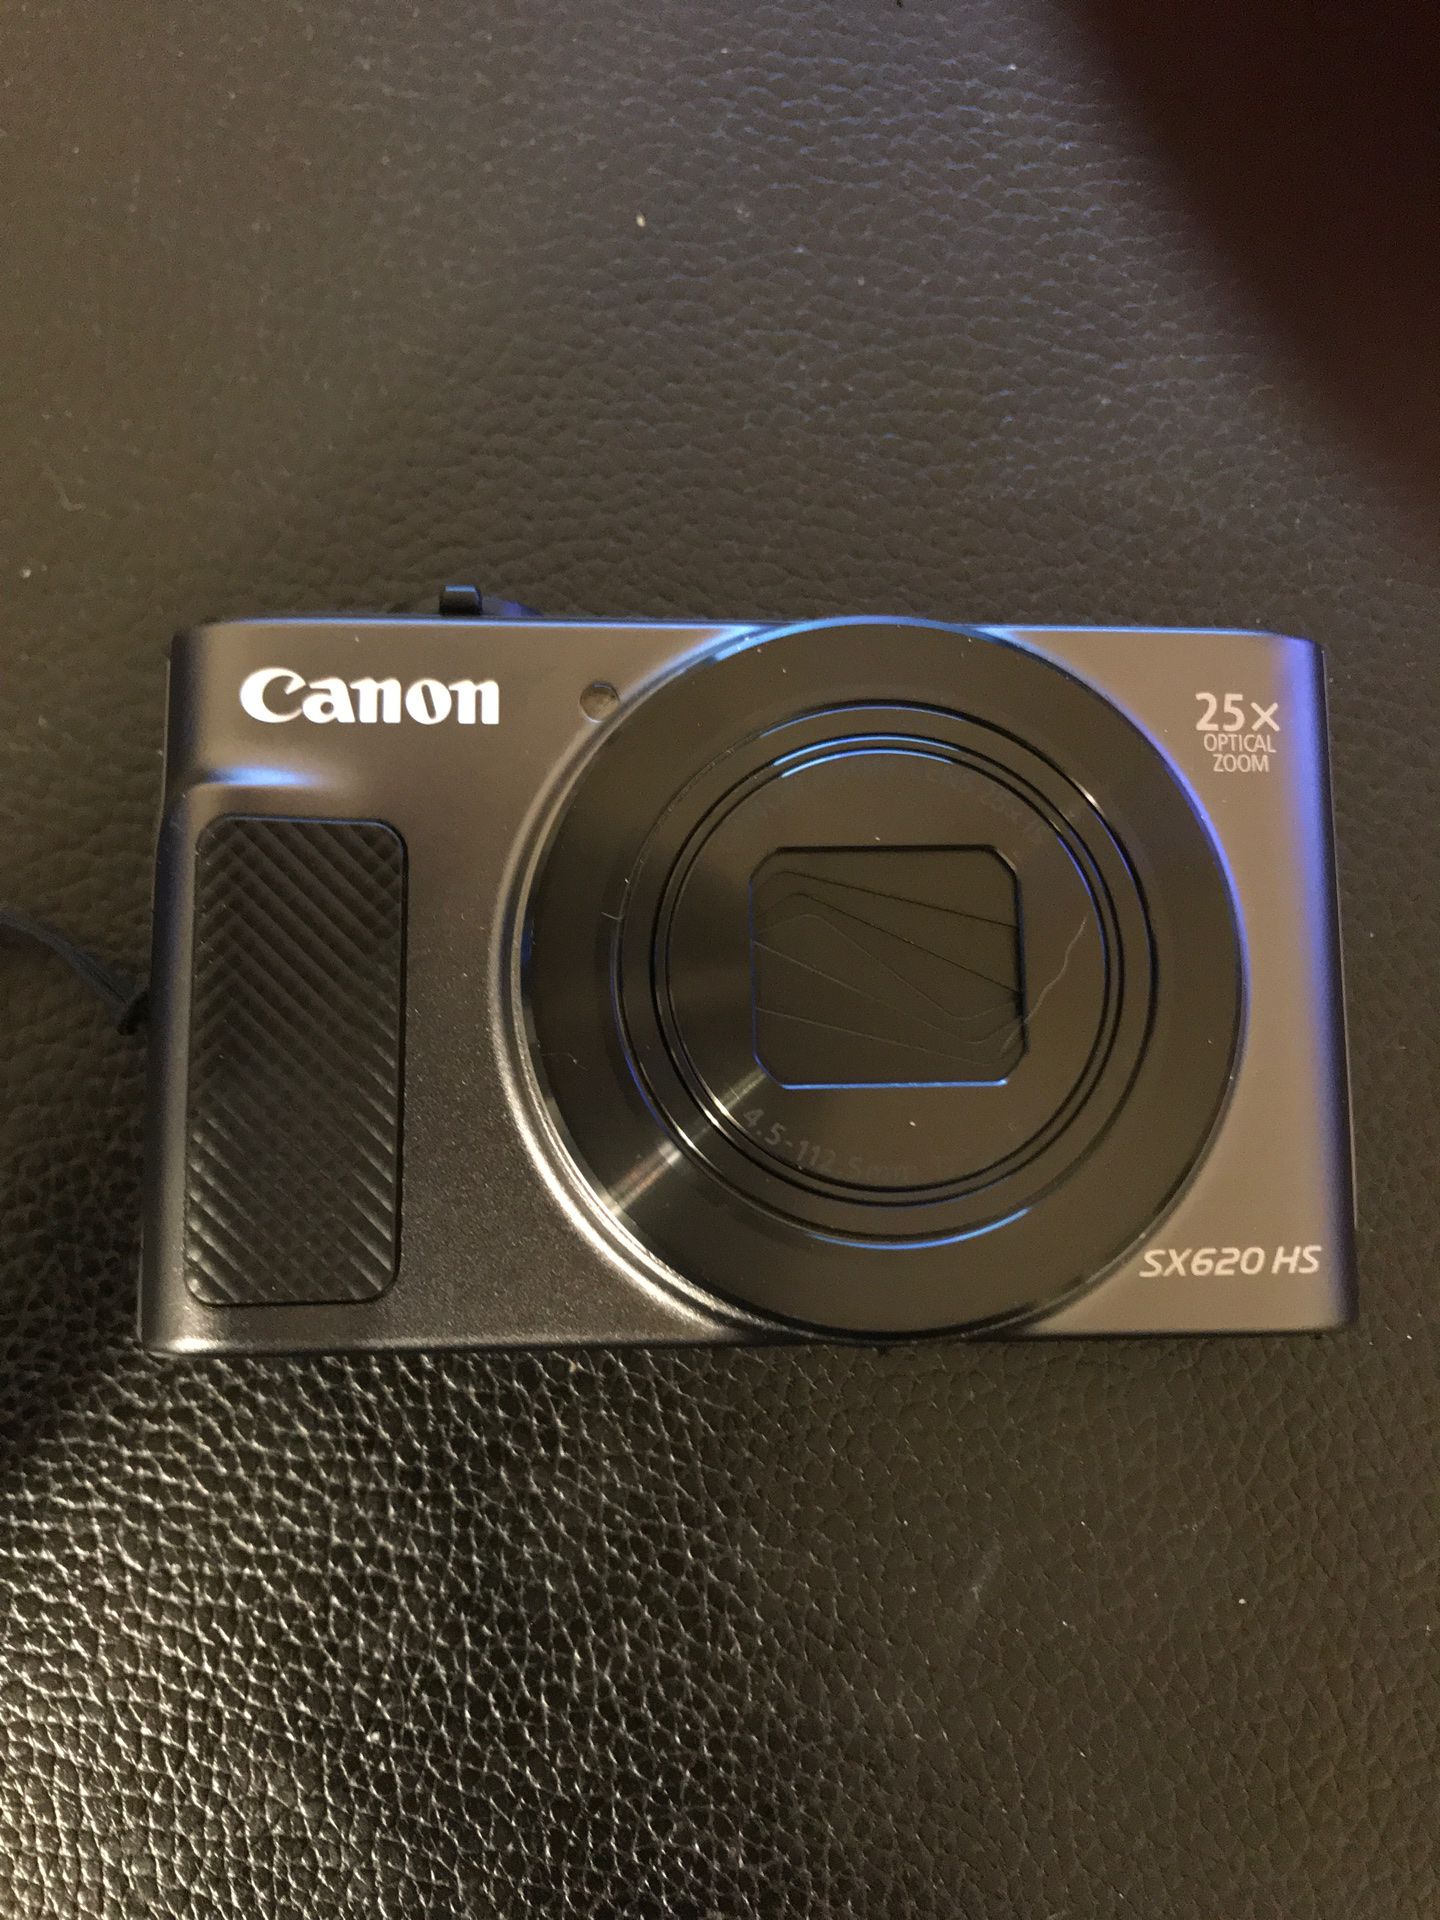 Canon SX620 HS digital camera with case and battery.